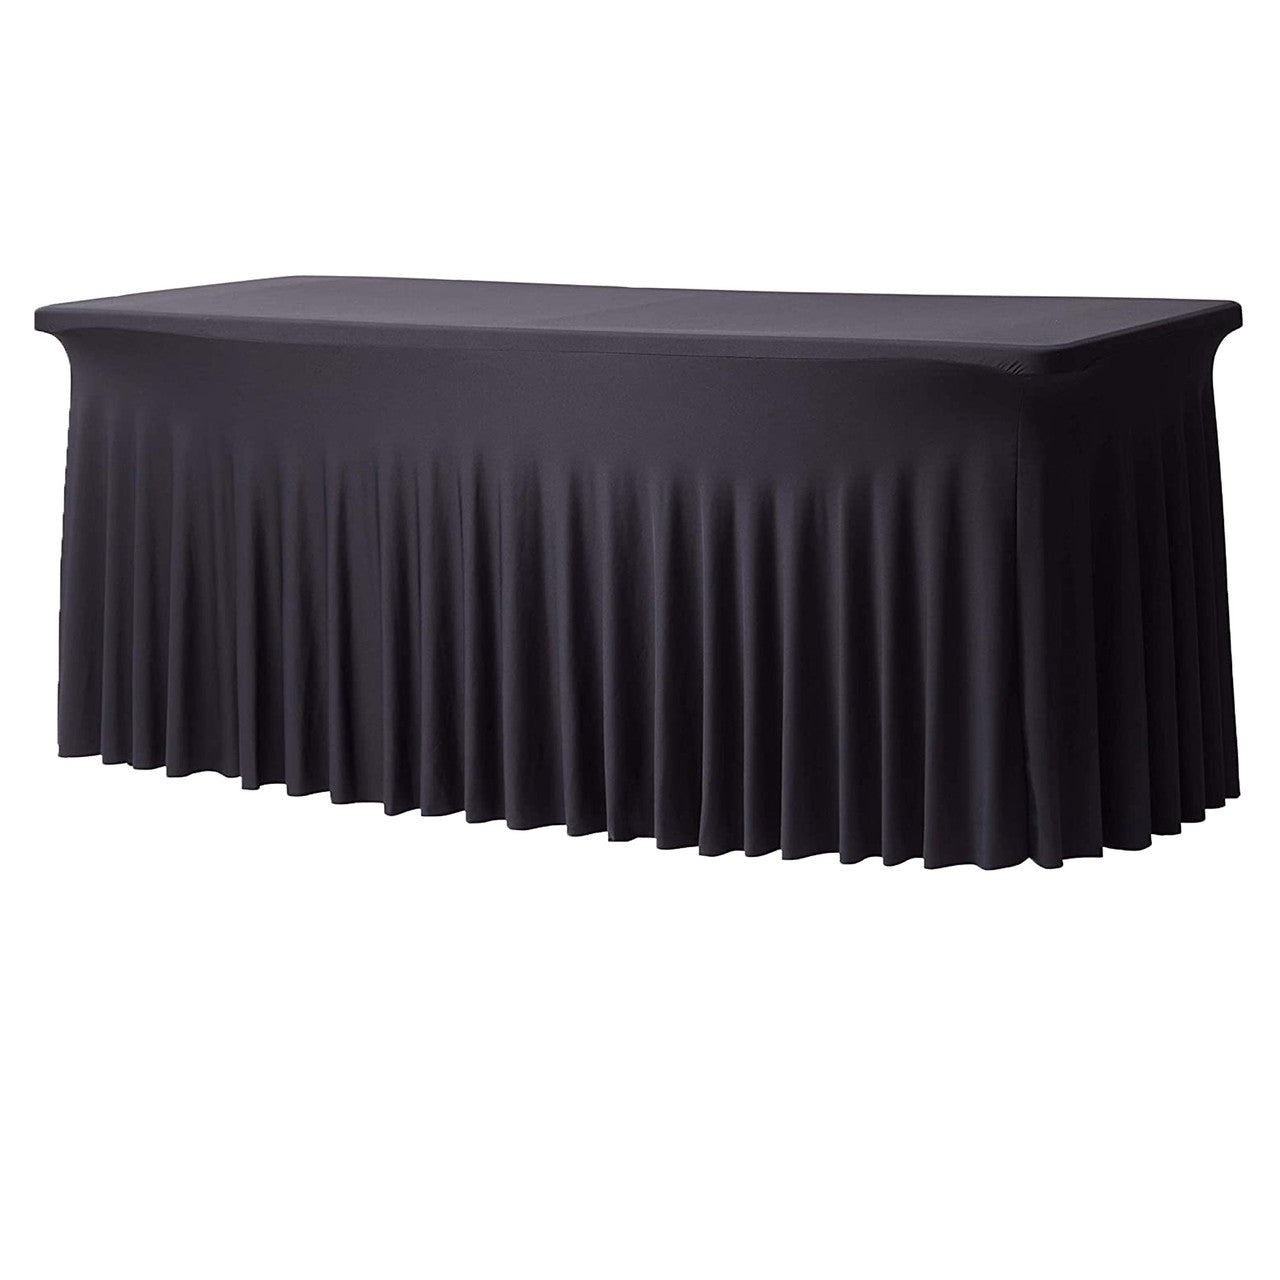 Stretch Spandex 6 ft Rectangular Wavy Draping Table Cover Black | Your ...